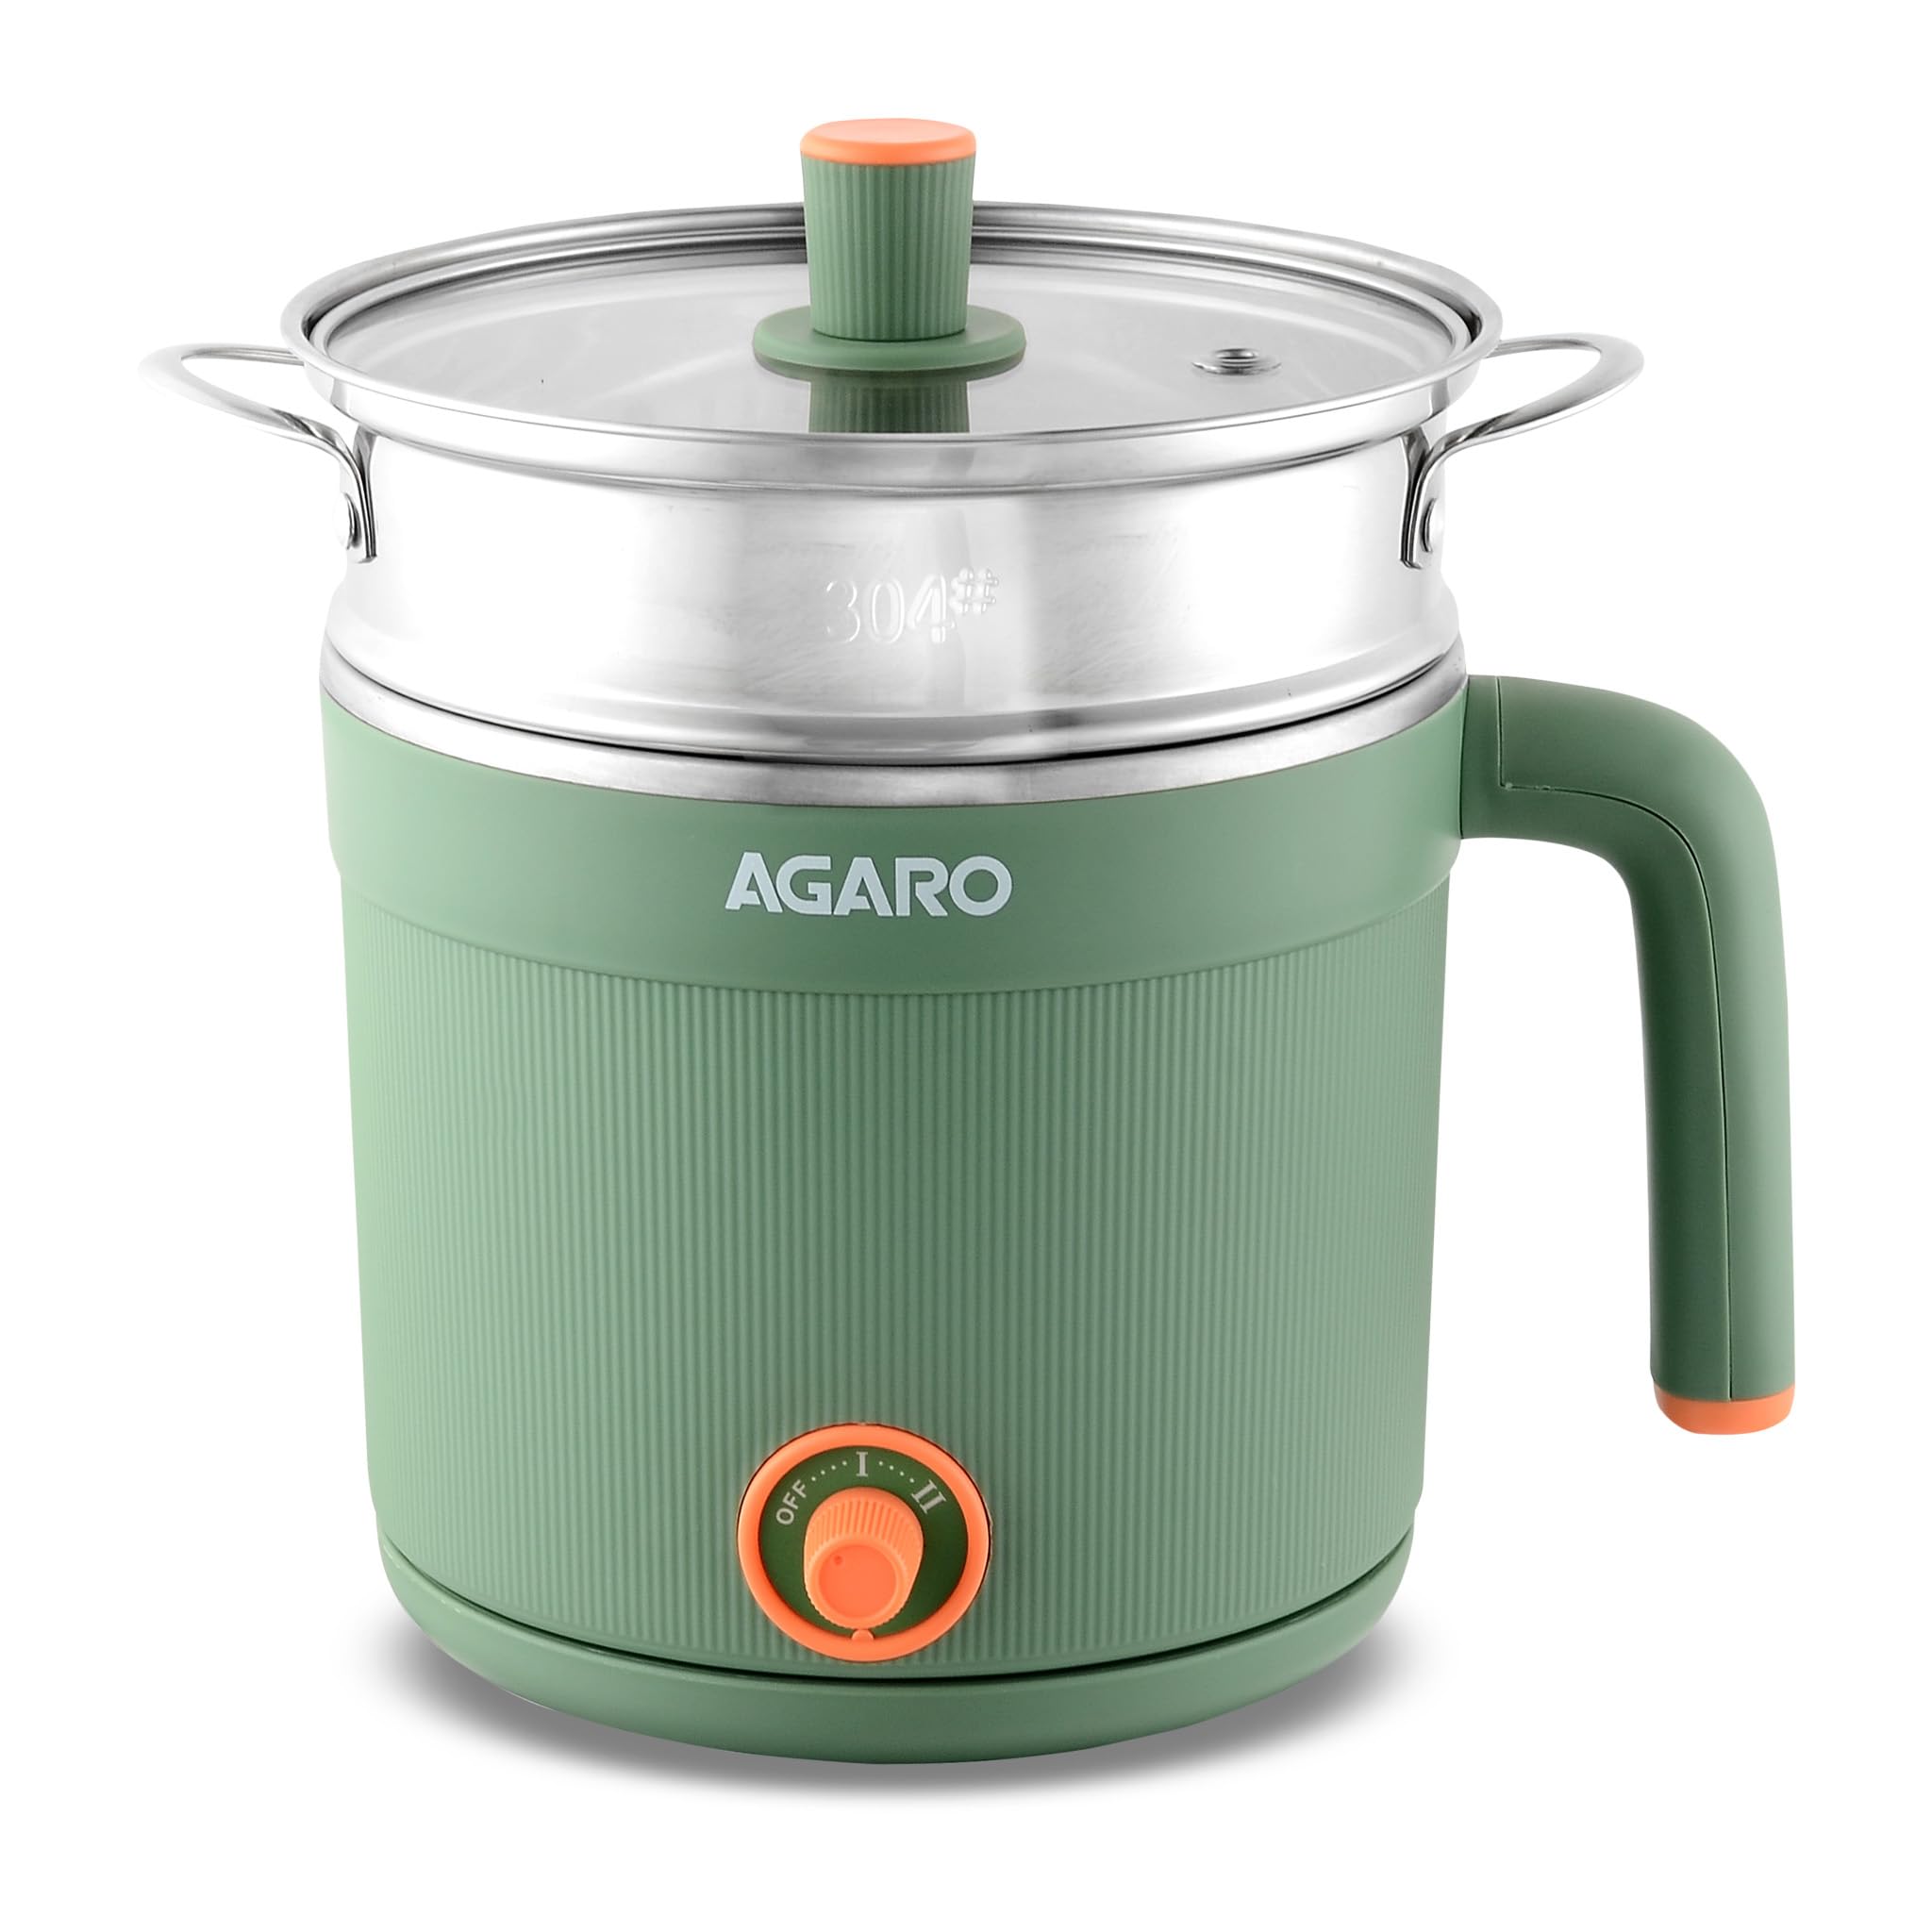 AGARO Regency Multi Cook Kettle With Steamer, 1.2L Inner Pot, Double  Layered Body, Variable Temperature Settings, Wide Mouth, Boiling, Steaming,  Tea, Coffee, Egg, Vegetable Boiling, 600W, Sea Green : Amazon.in: Home &